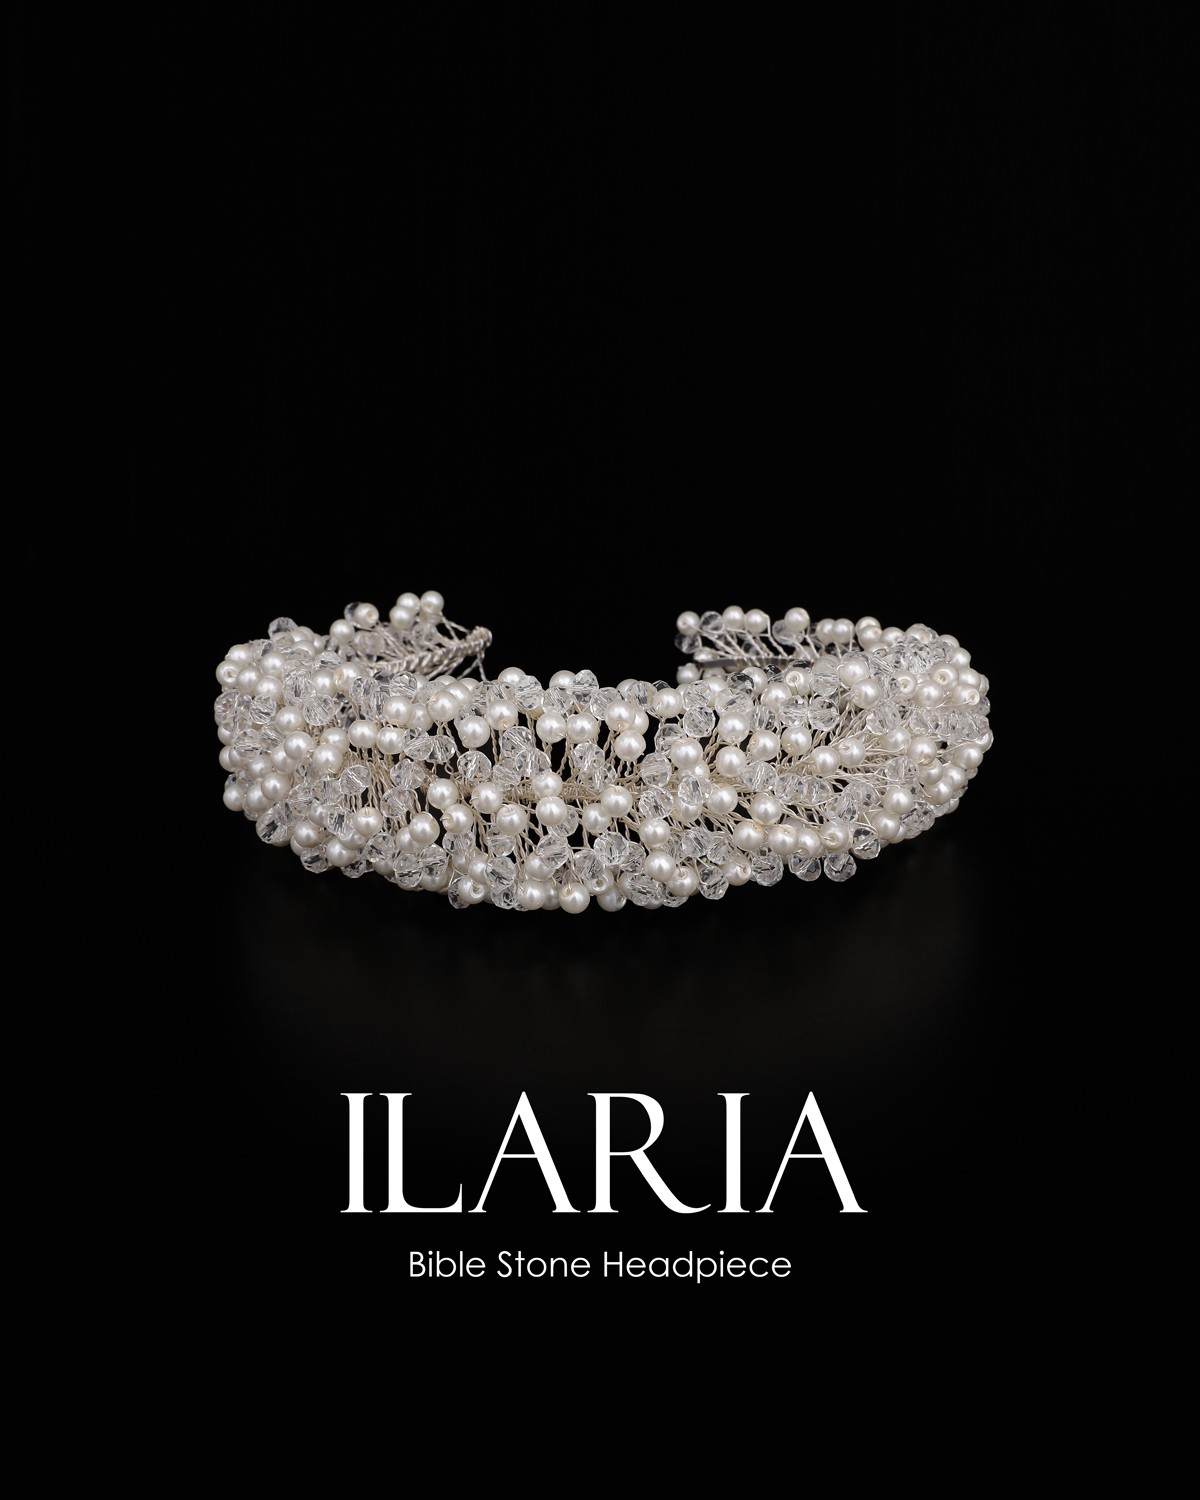 Ilaria Crystal Beads And Pearl Detailed Hair Accessories Buy Now.